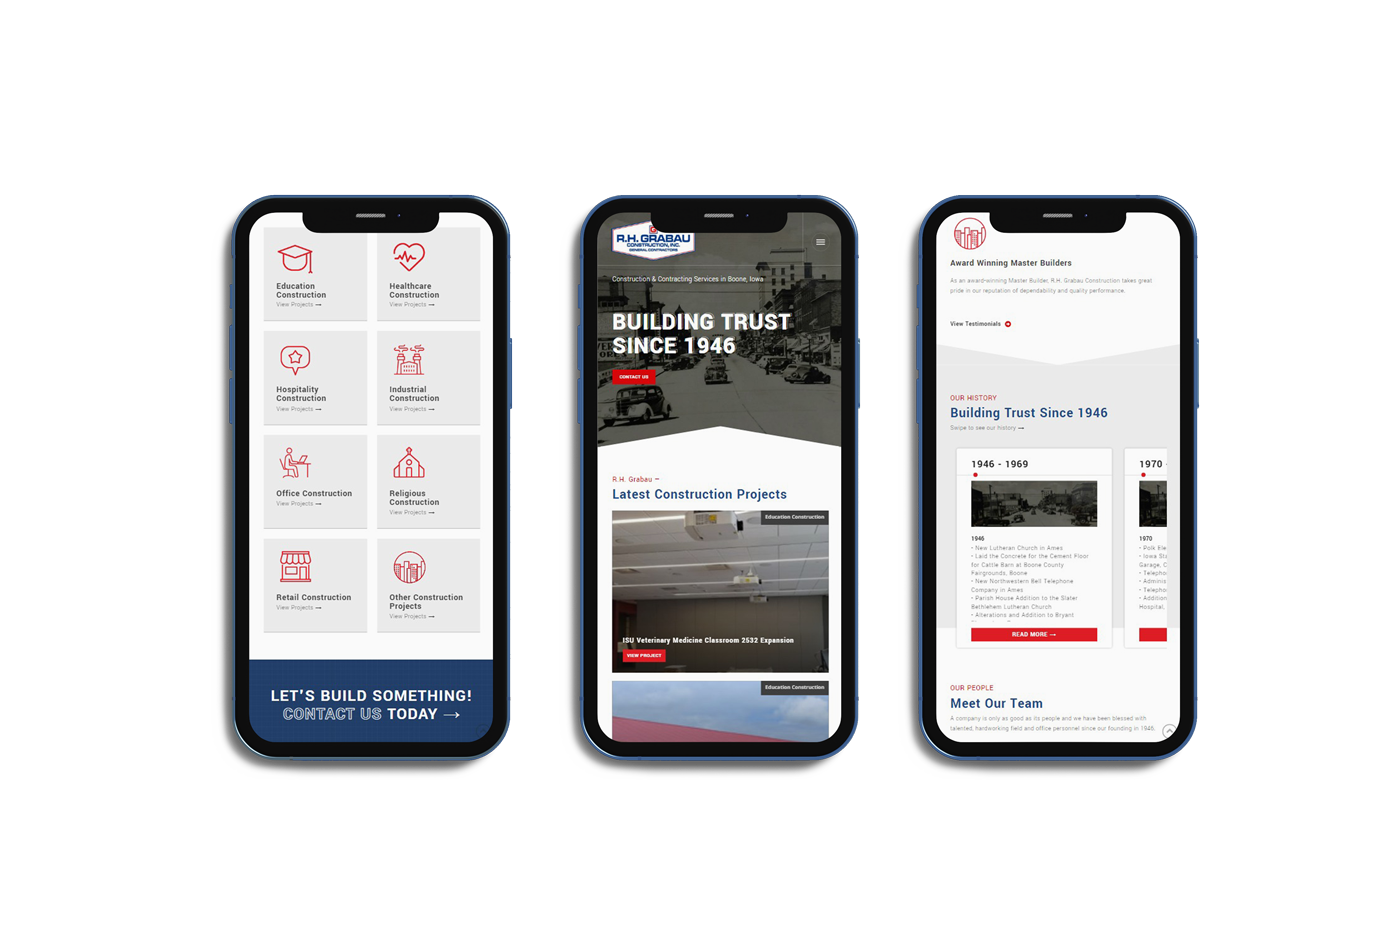 Mockup showing three different mobile views of the RH Grabau website